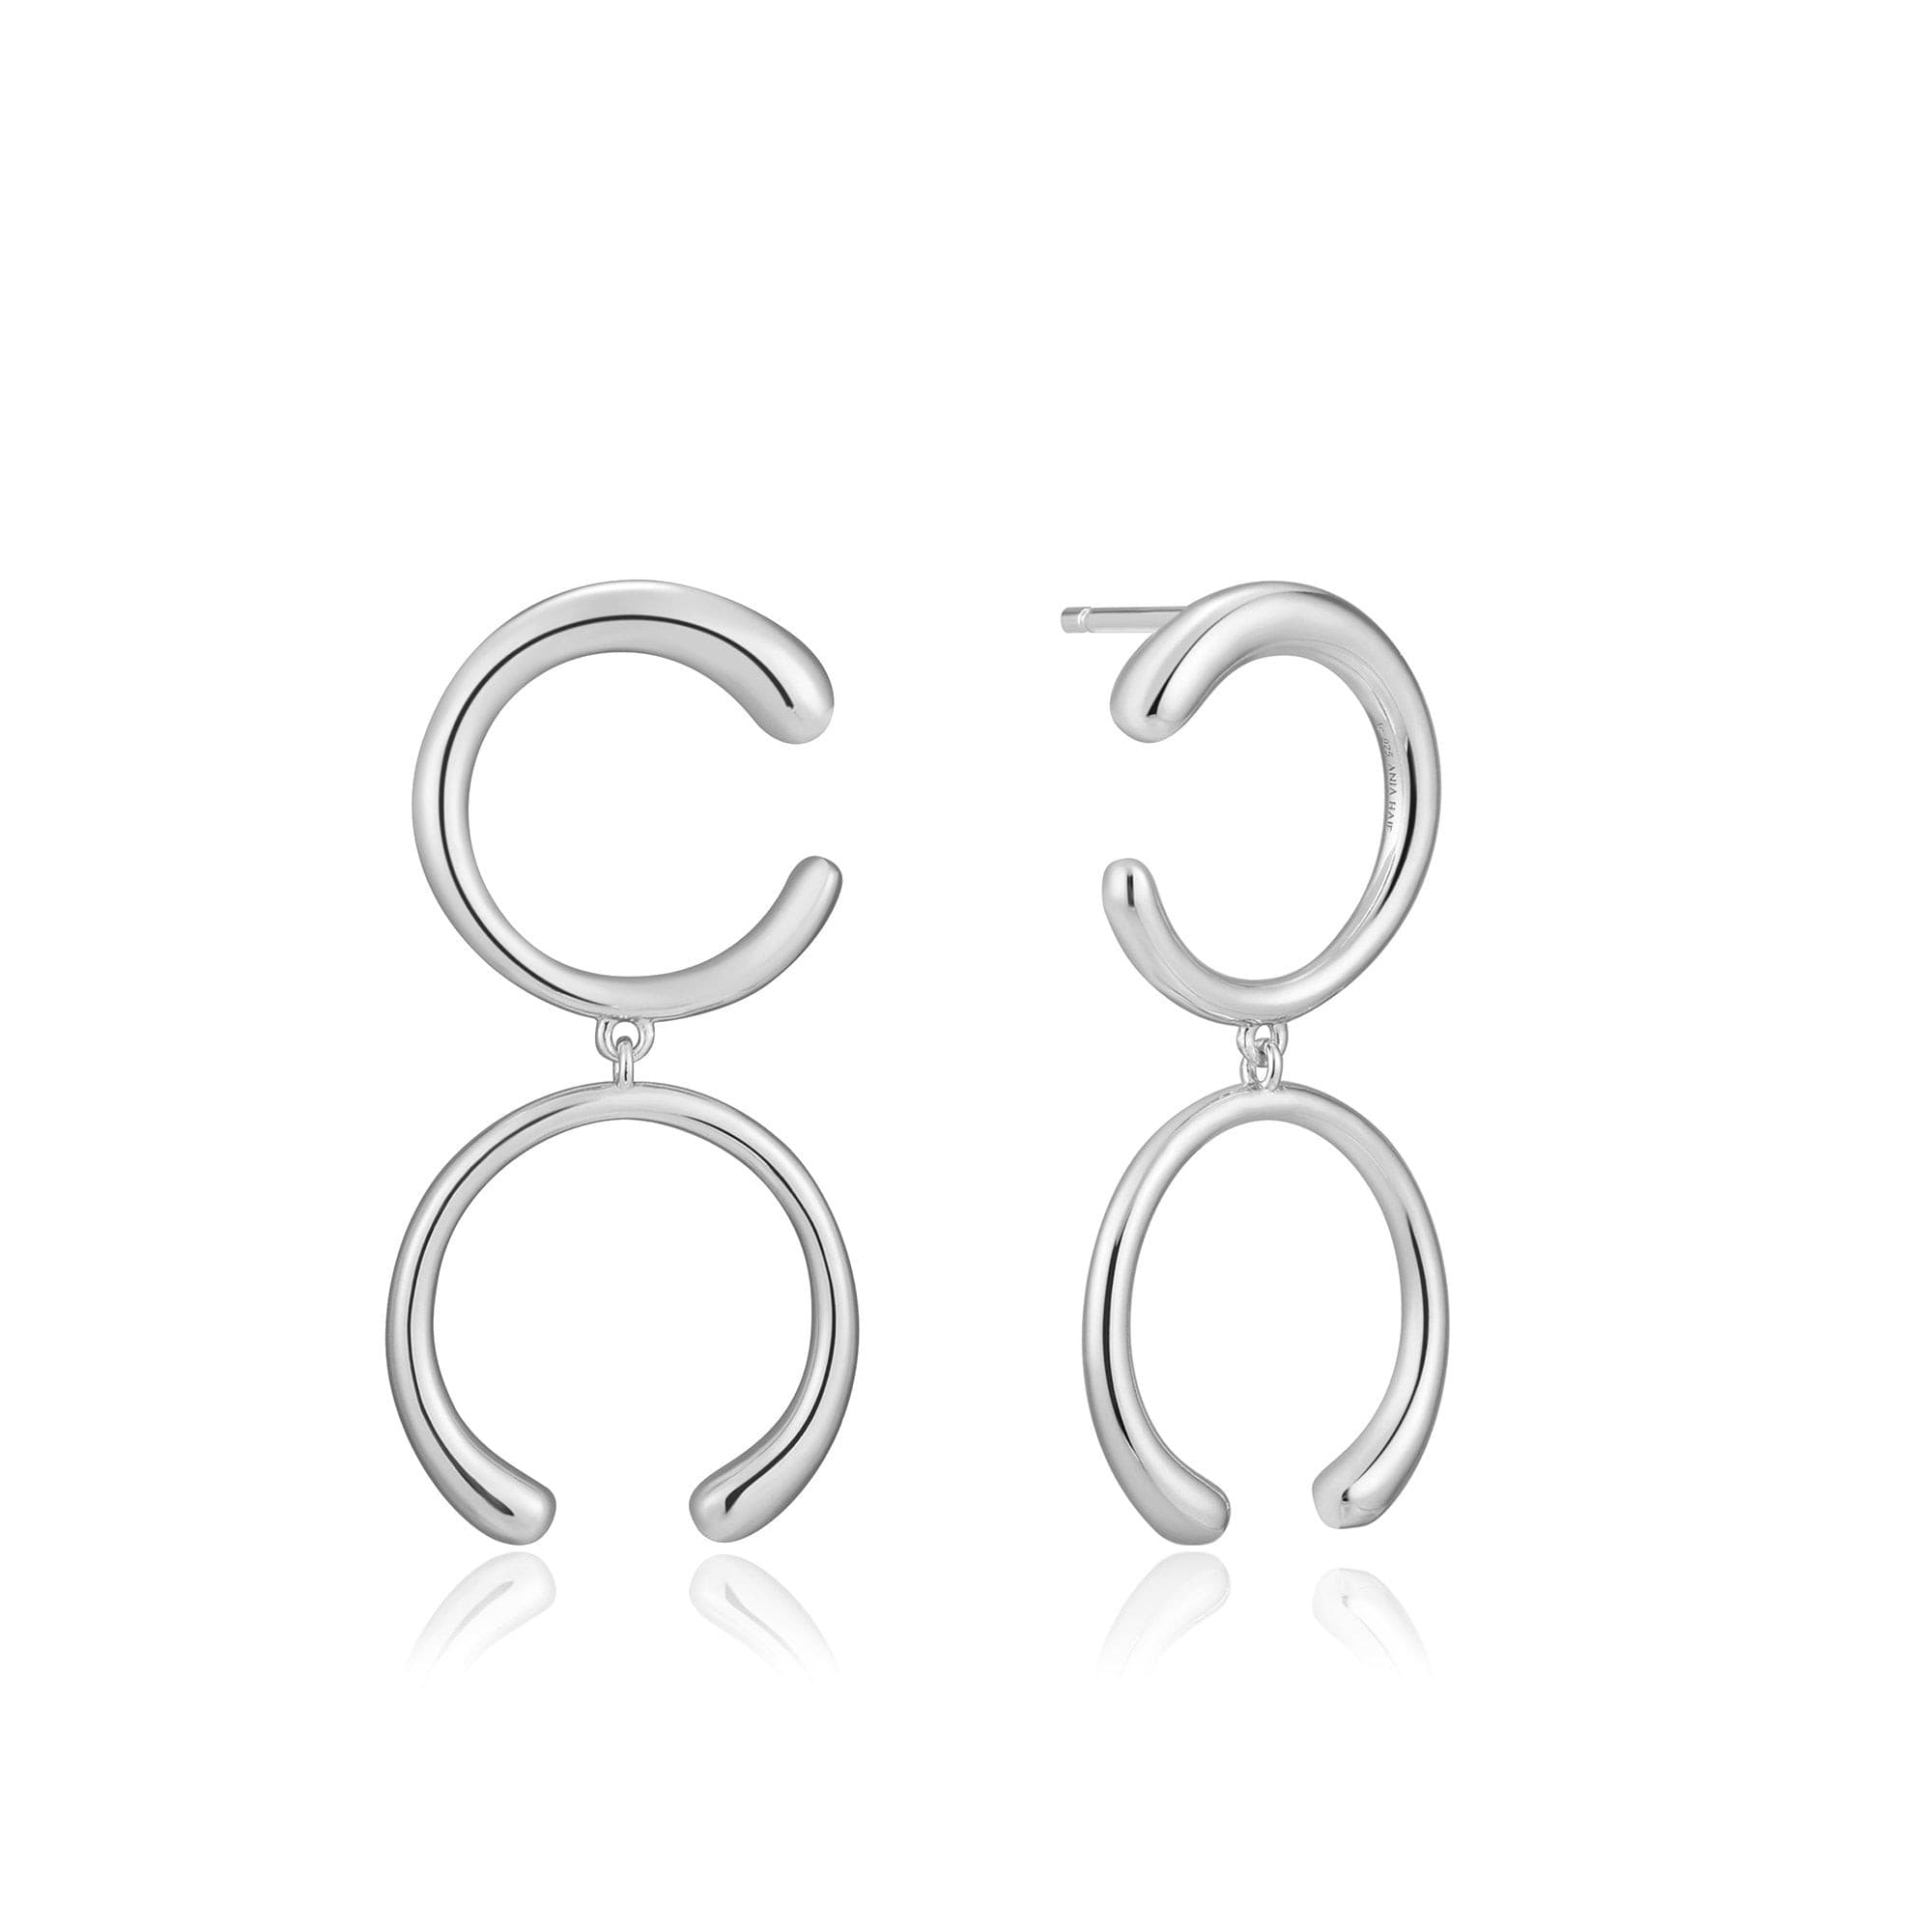 Ania Haie Silver Luxe Double Curve Earrings